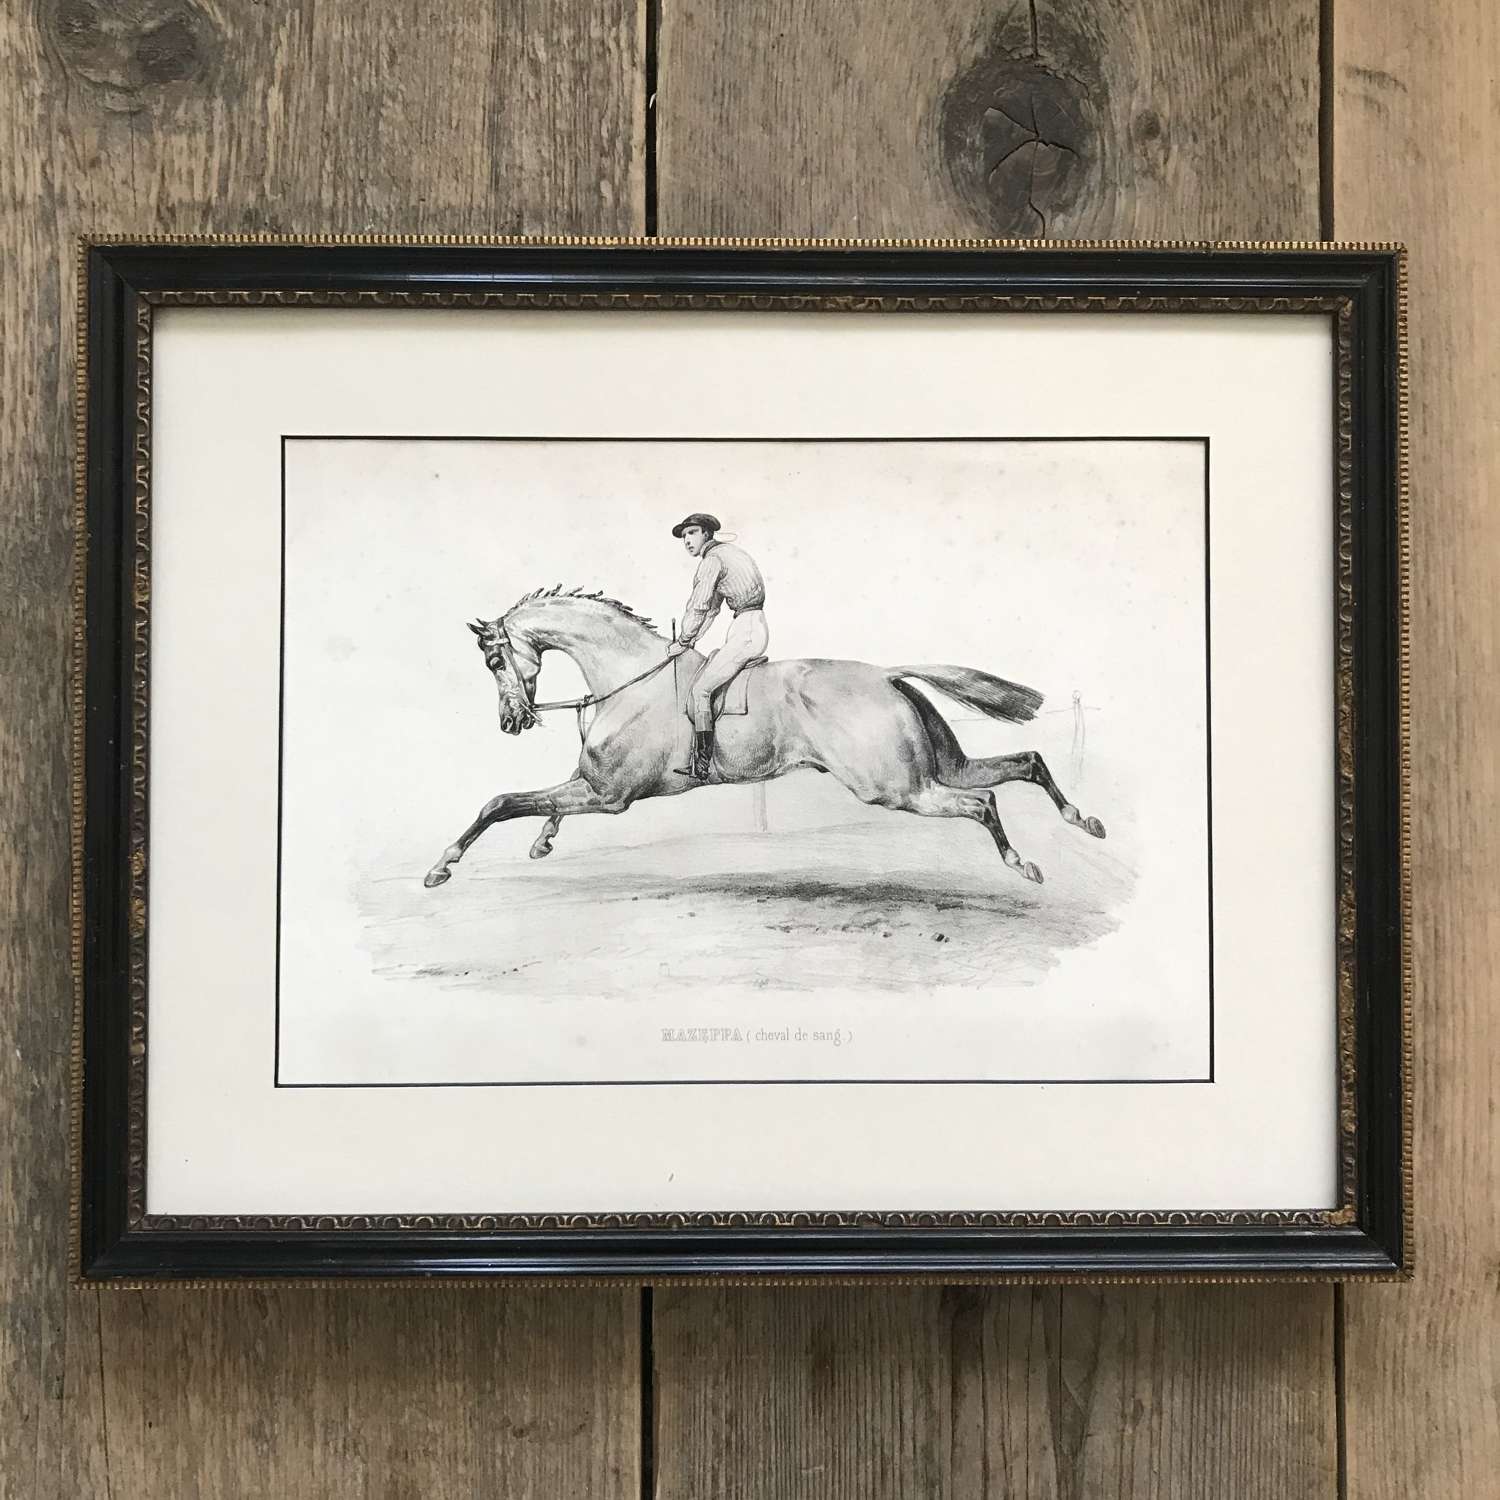 19th century French etching of a galloping racehorse